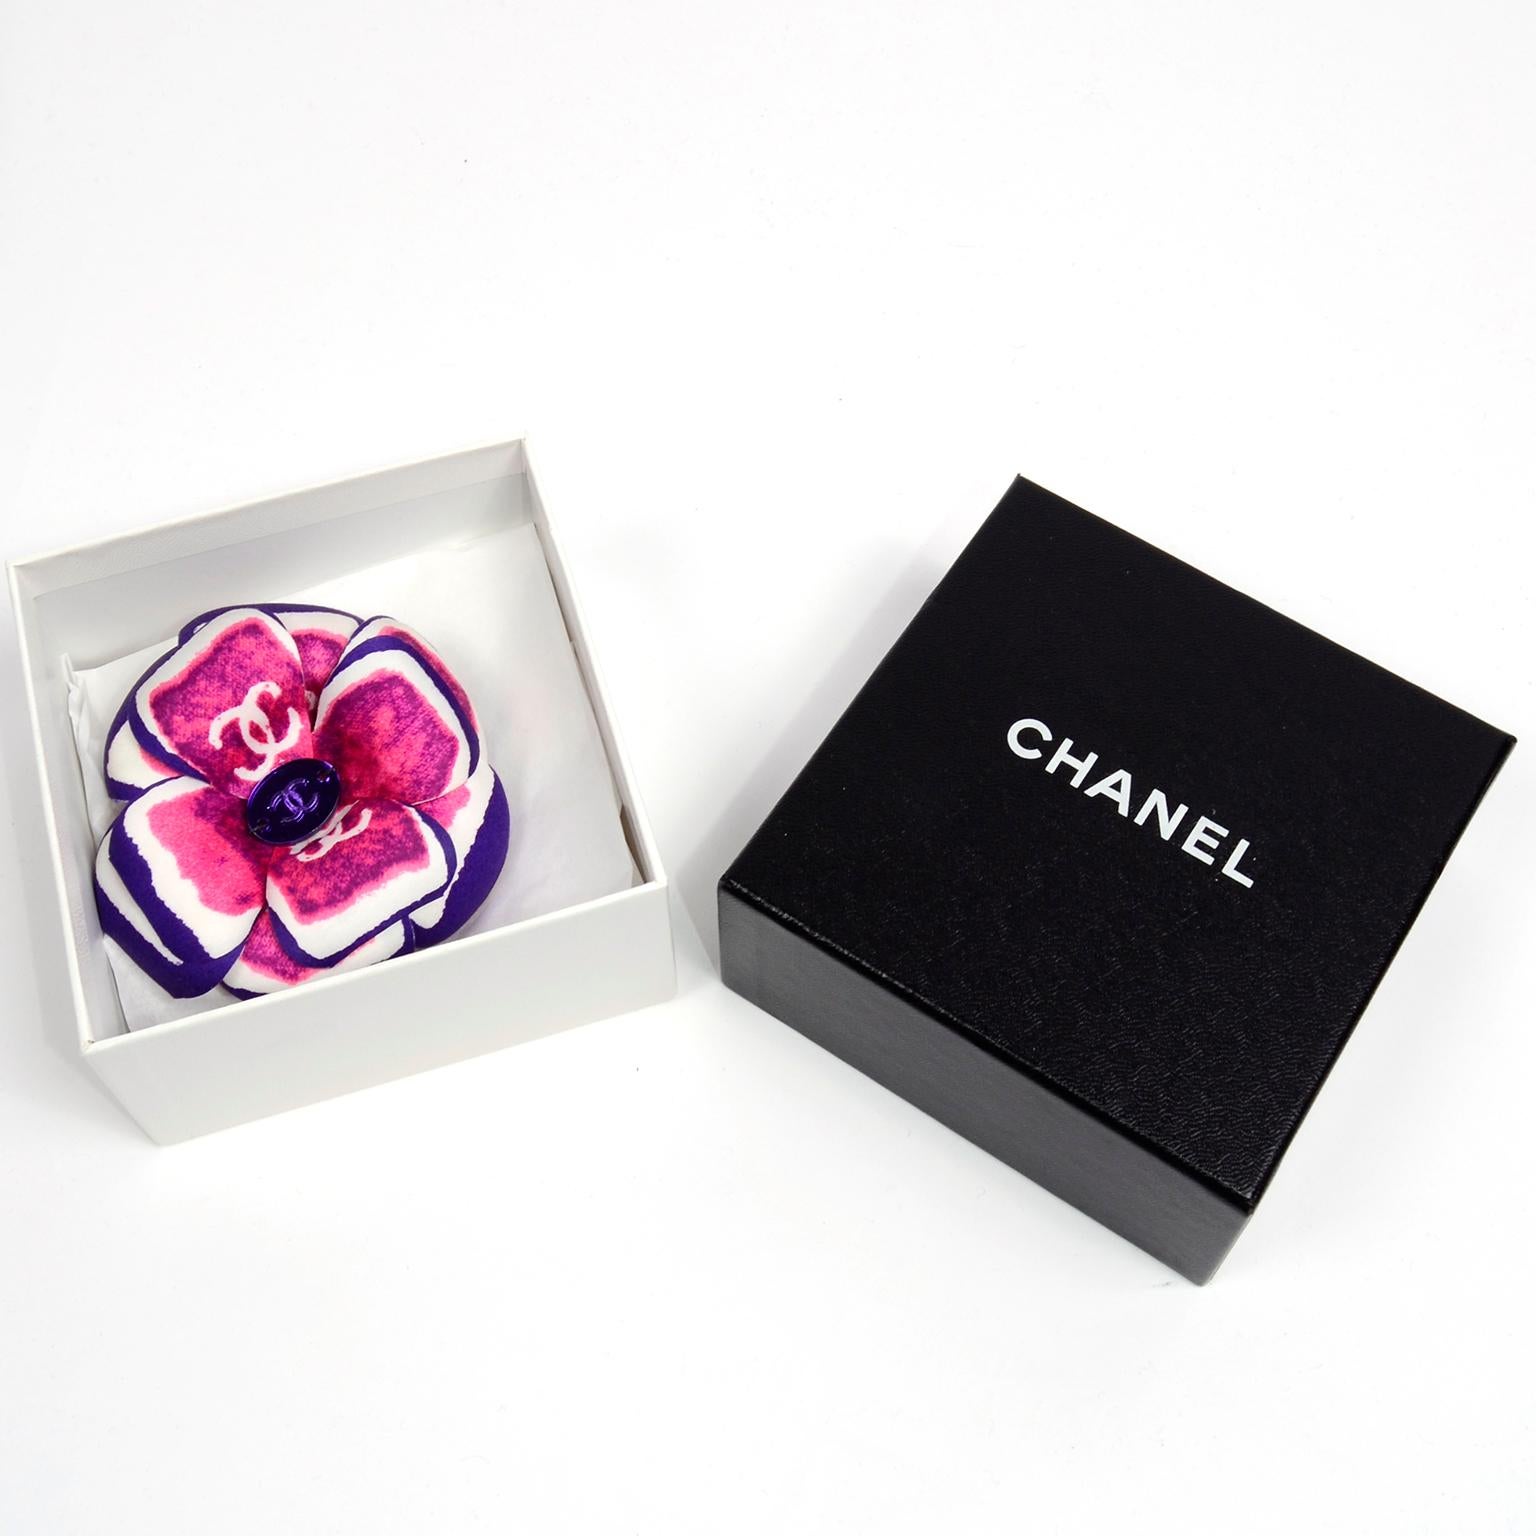 This is a very unique Chanel multicolored silk camellia brooch from the Chanel Spring 2001 collection. It comes with its original tag and box. This lovely flower brooch has a purple edge with white and pink/purple center with CC marked along the